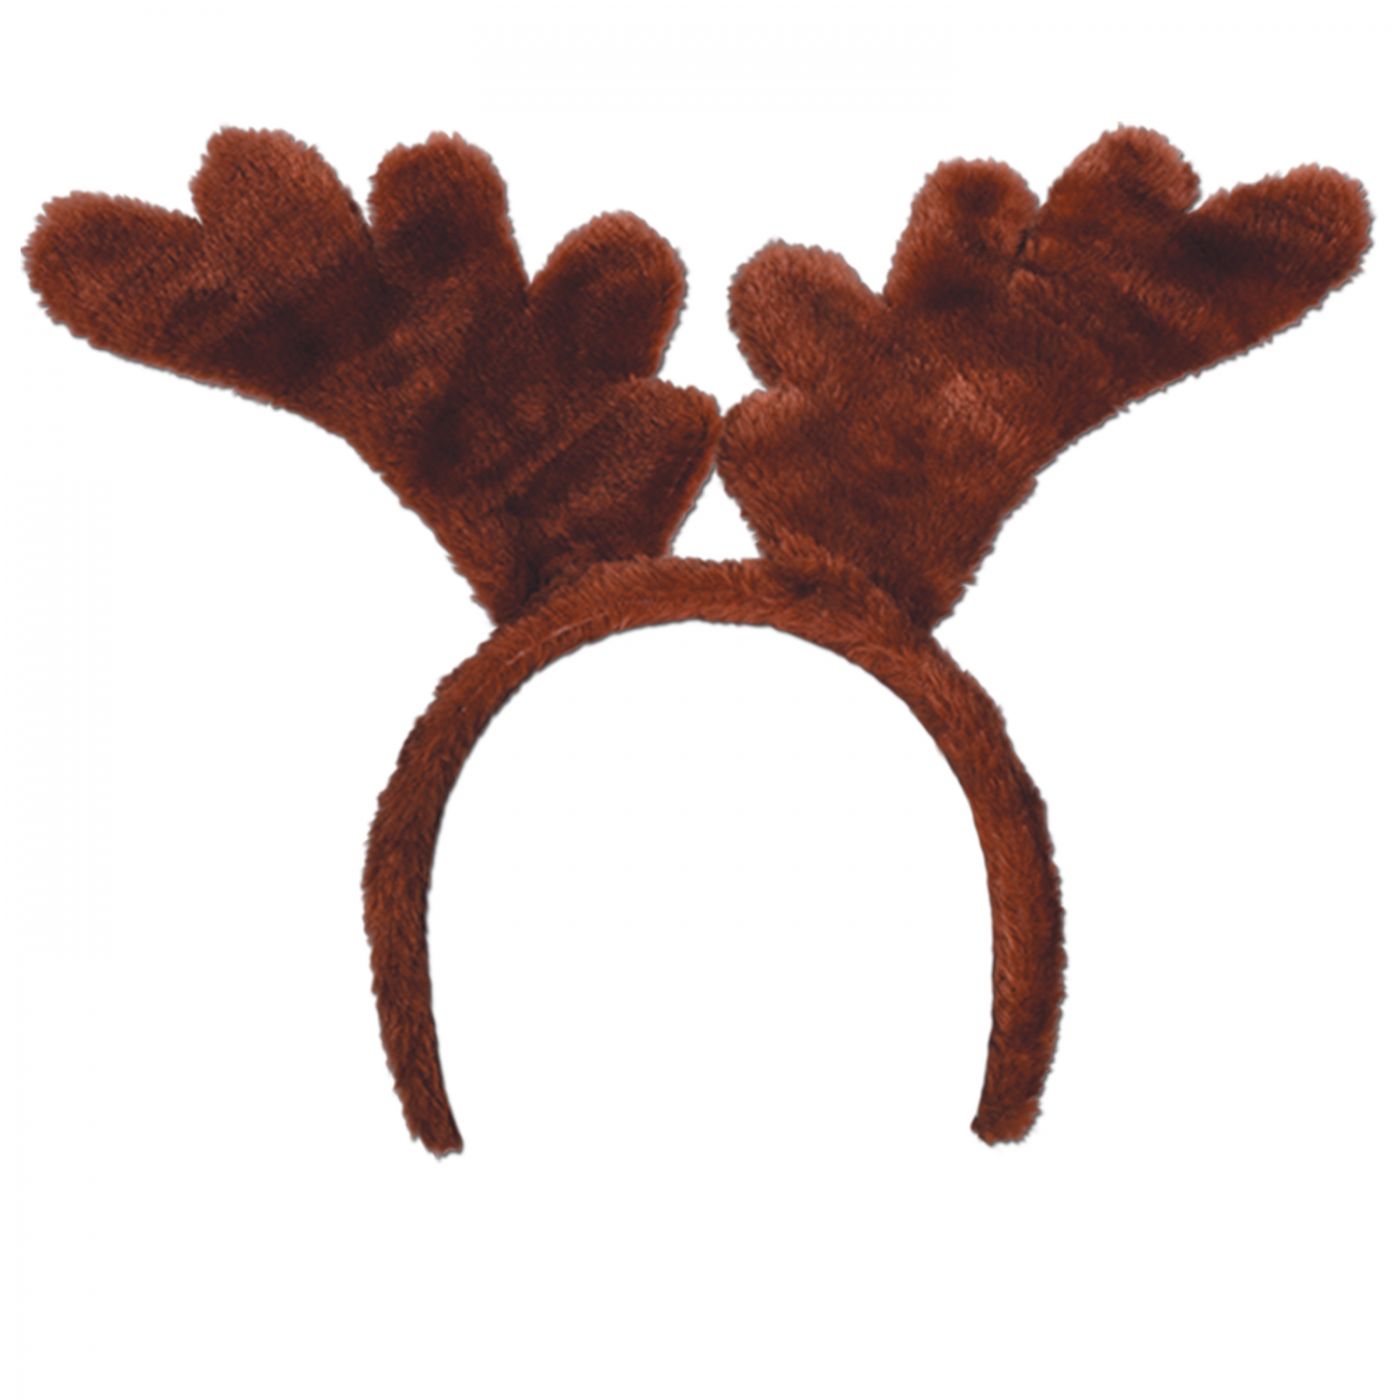 Soft-Touch Reindeer Antlers (12) image